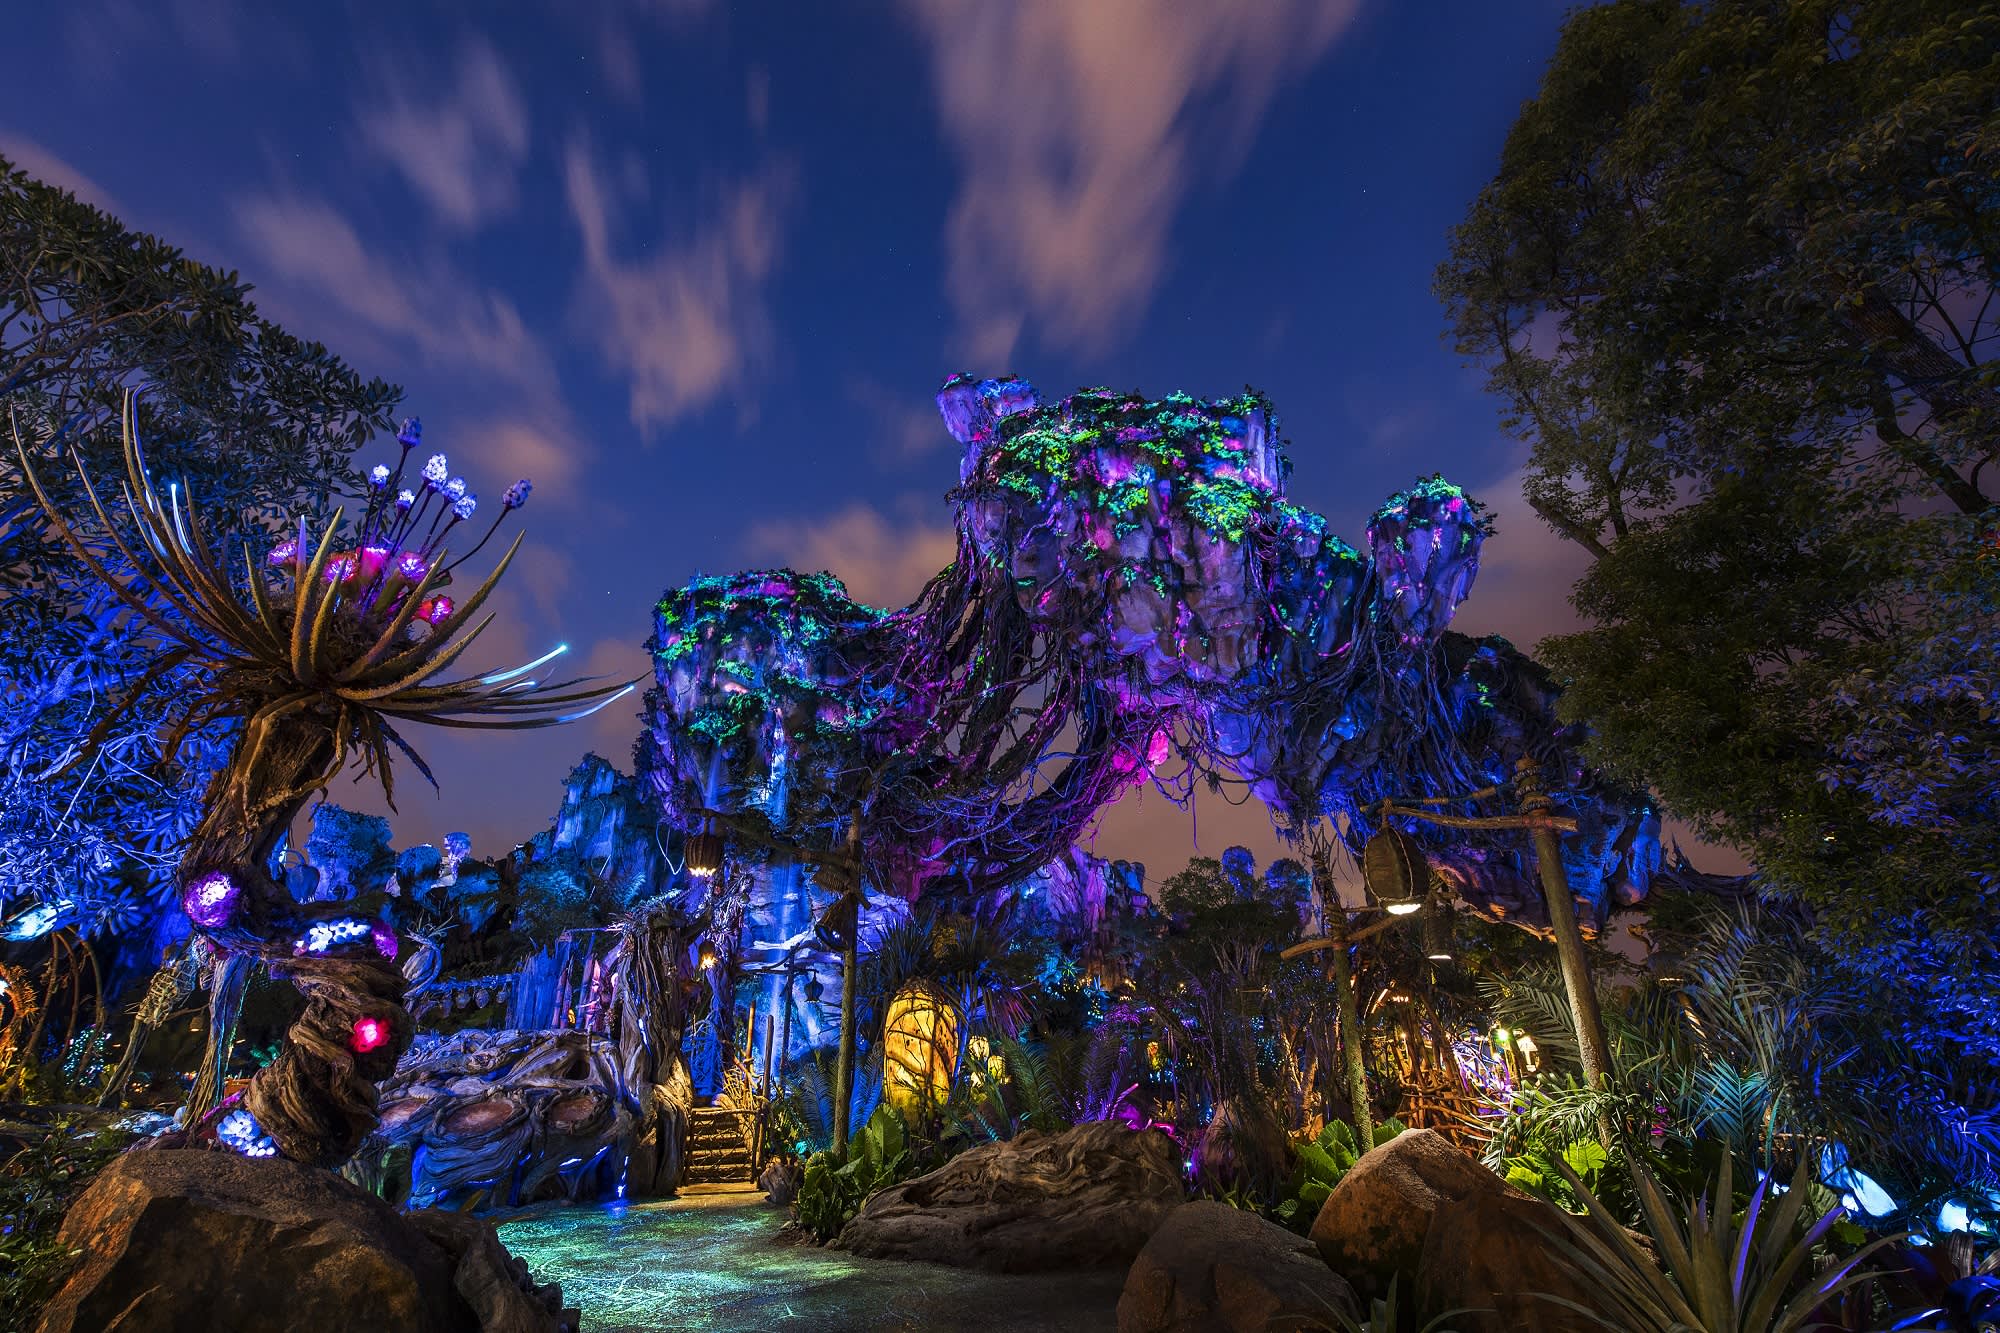 Win contest to stay overnight at Disney World's Avatar attraction